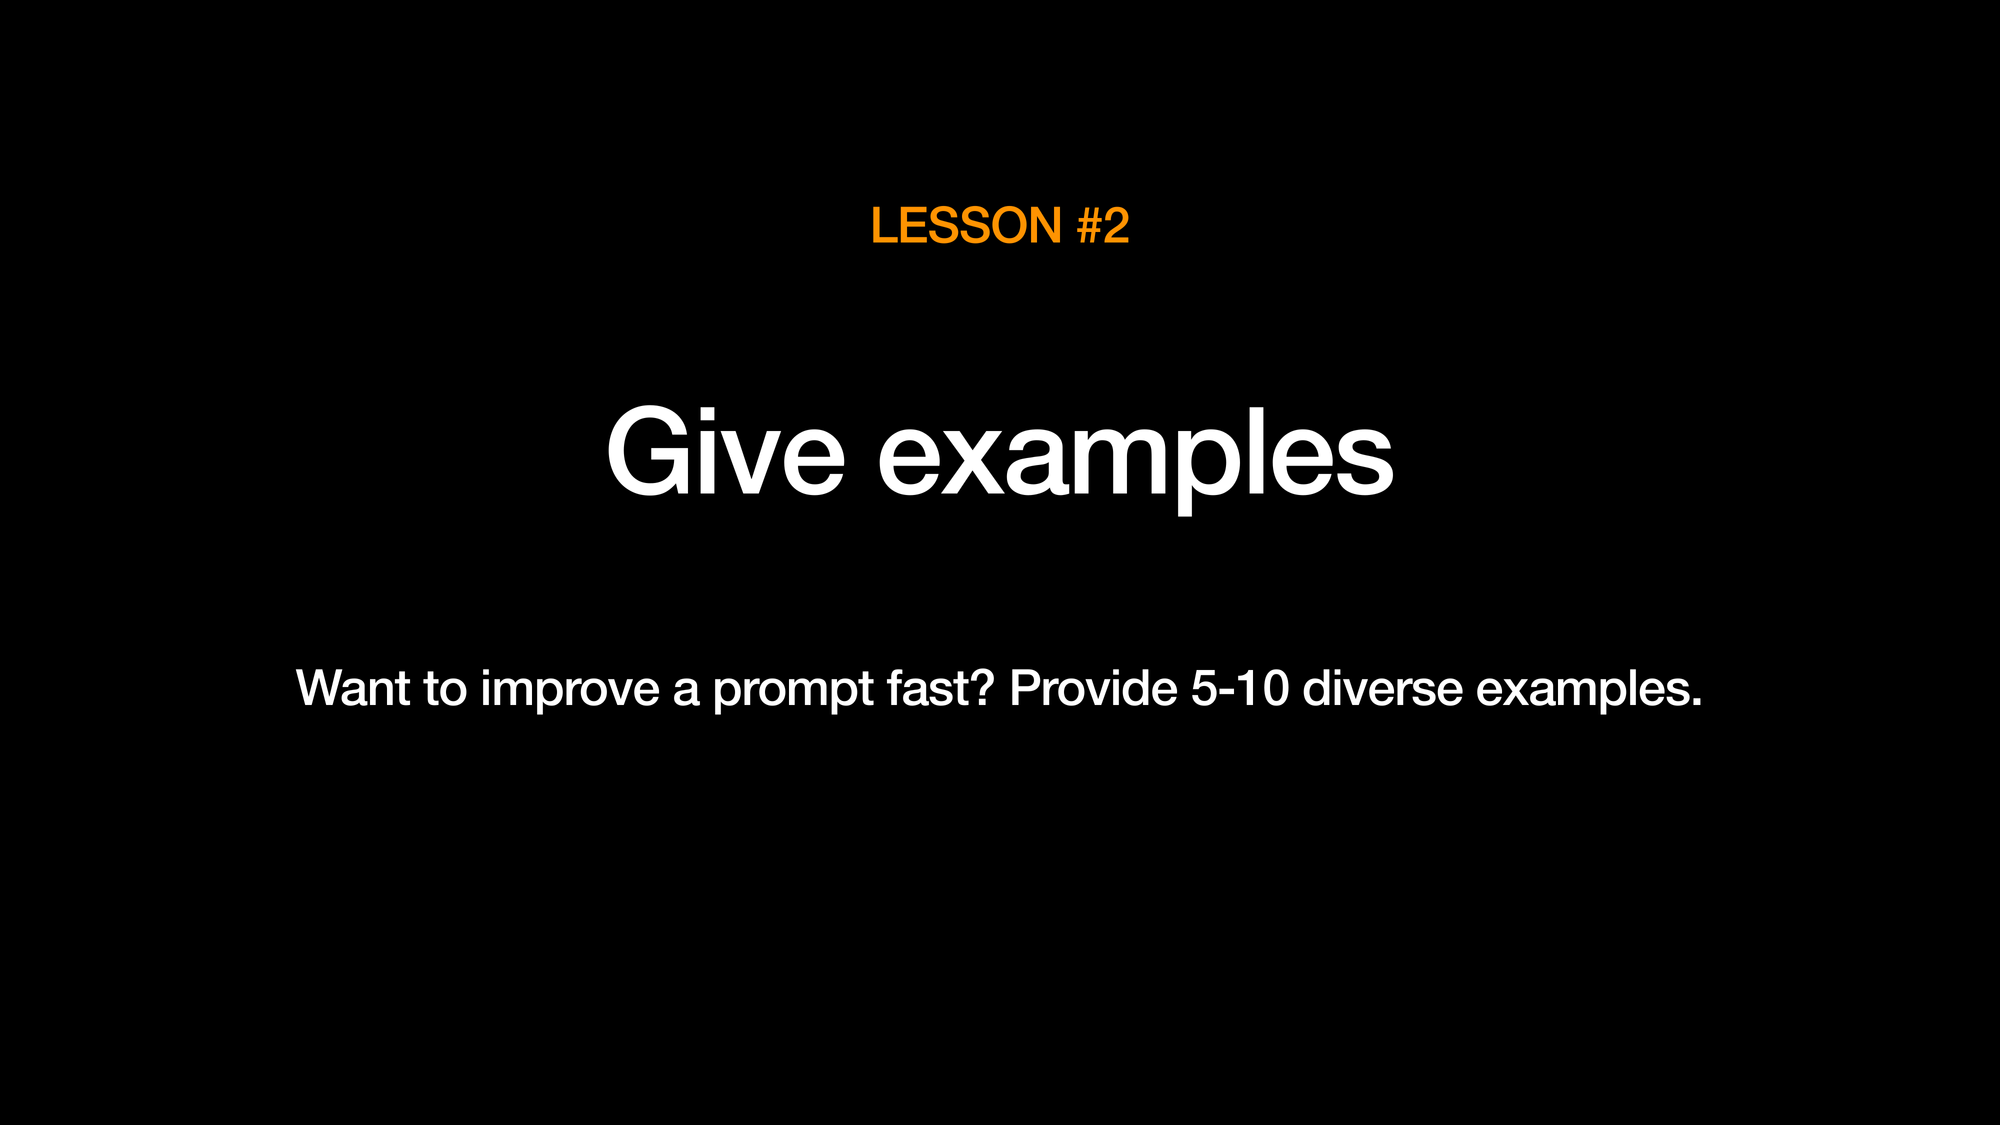 LESSON #2. Give examples. Want to improve a prompt fast? Provide 5-10 diverse examples.
